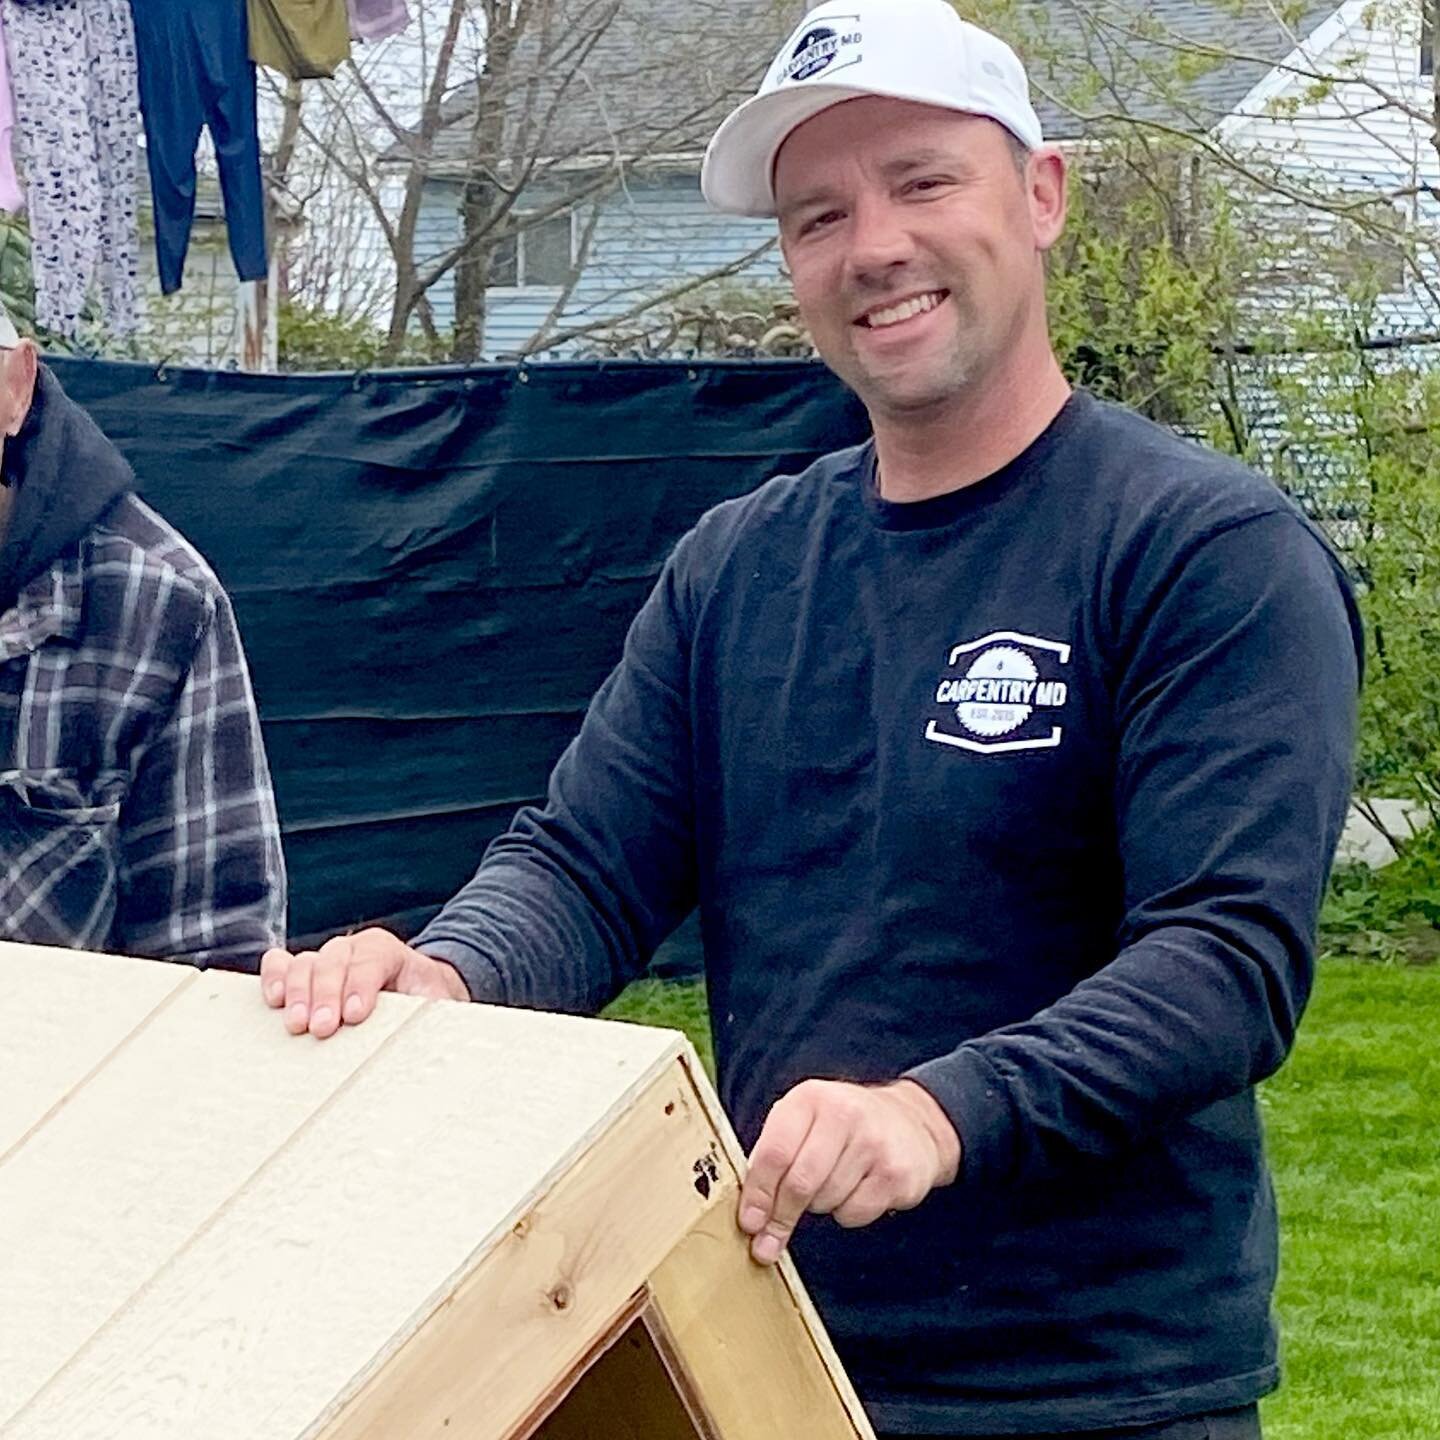 This handsome carpenter hero is building me an herb 🌿 planter 🖤 @carpentry_md xx